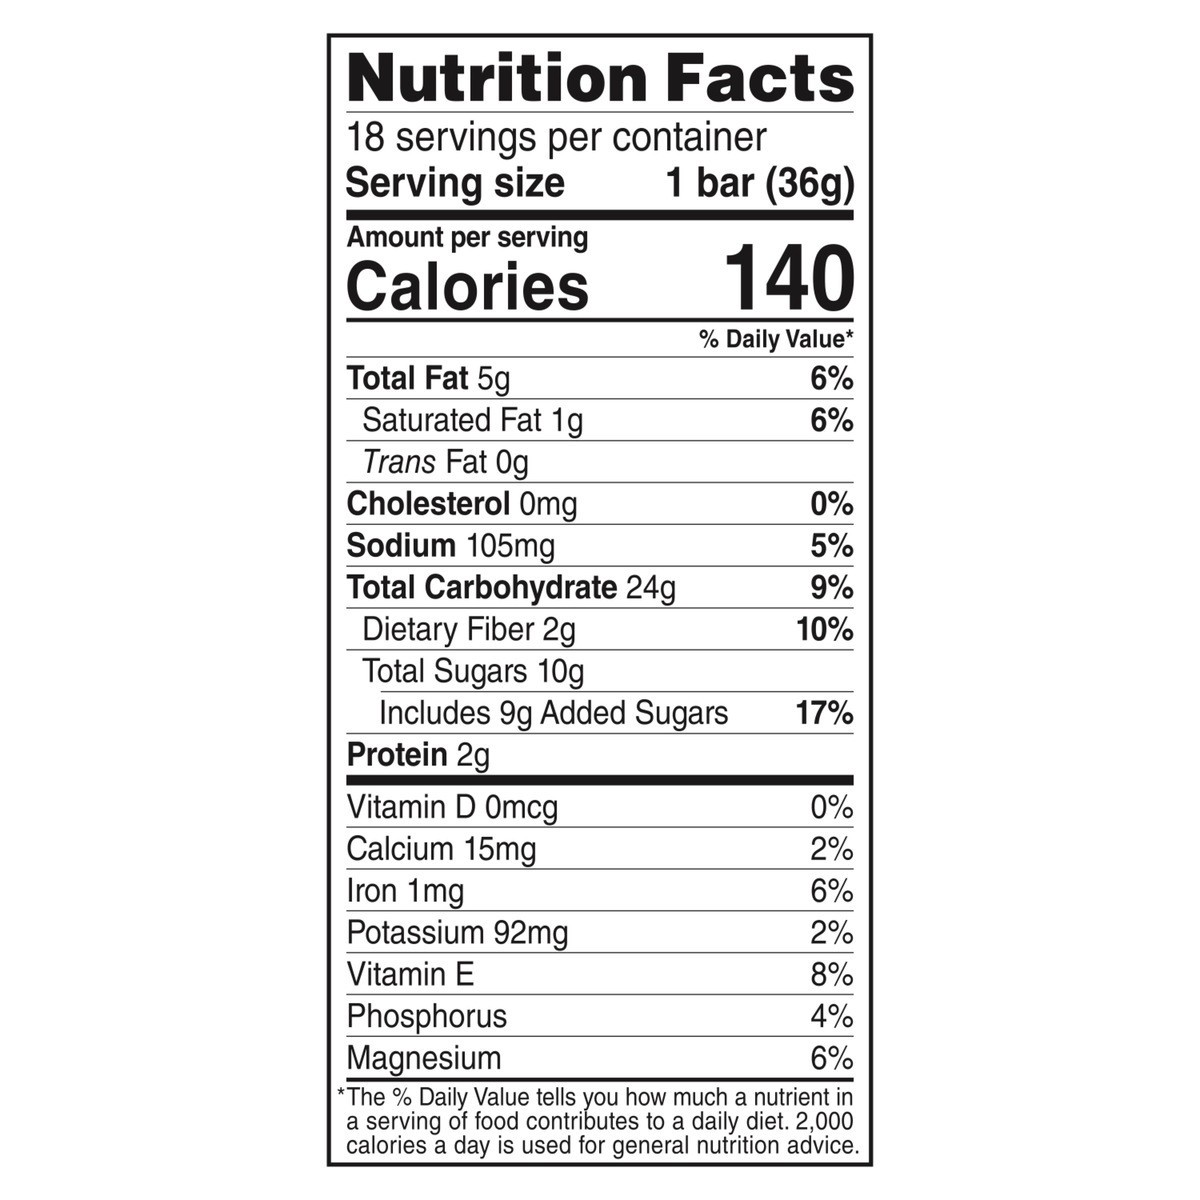 slide 9 of 12, CLIF Kid Zbar - Chocolate Chip - Soft Baked Whole Grain Snack Bars - USDA Organic - Non-GMO - Plant-Based - 1.27 oz. (18 Count), 22.86 oz